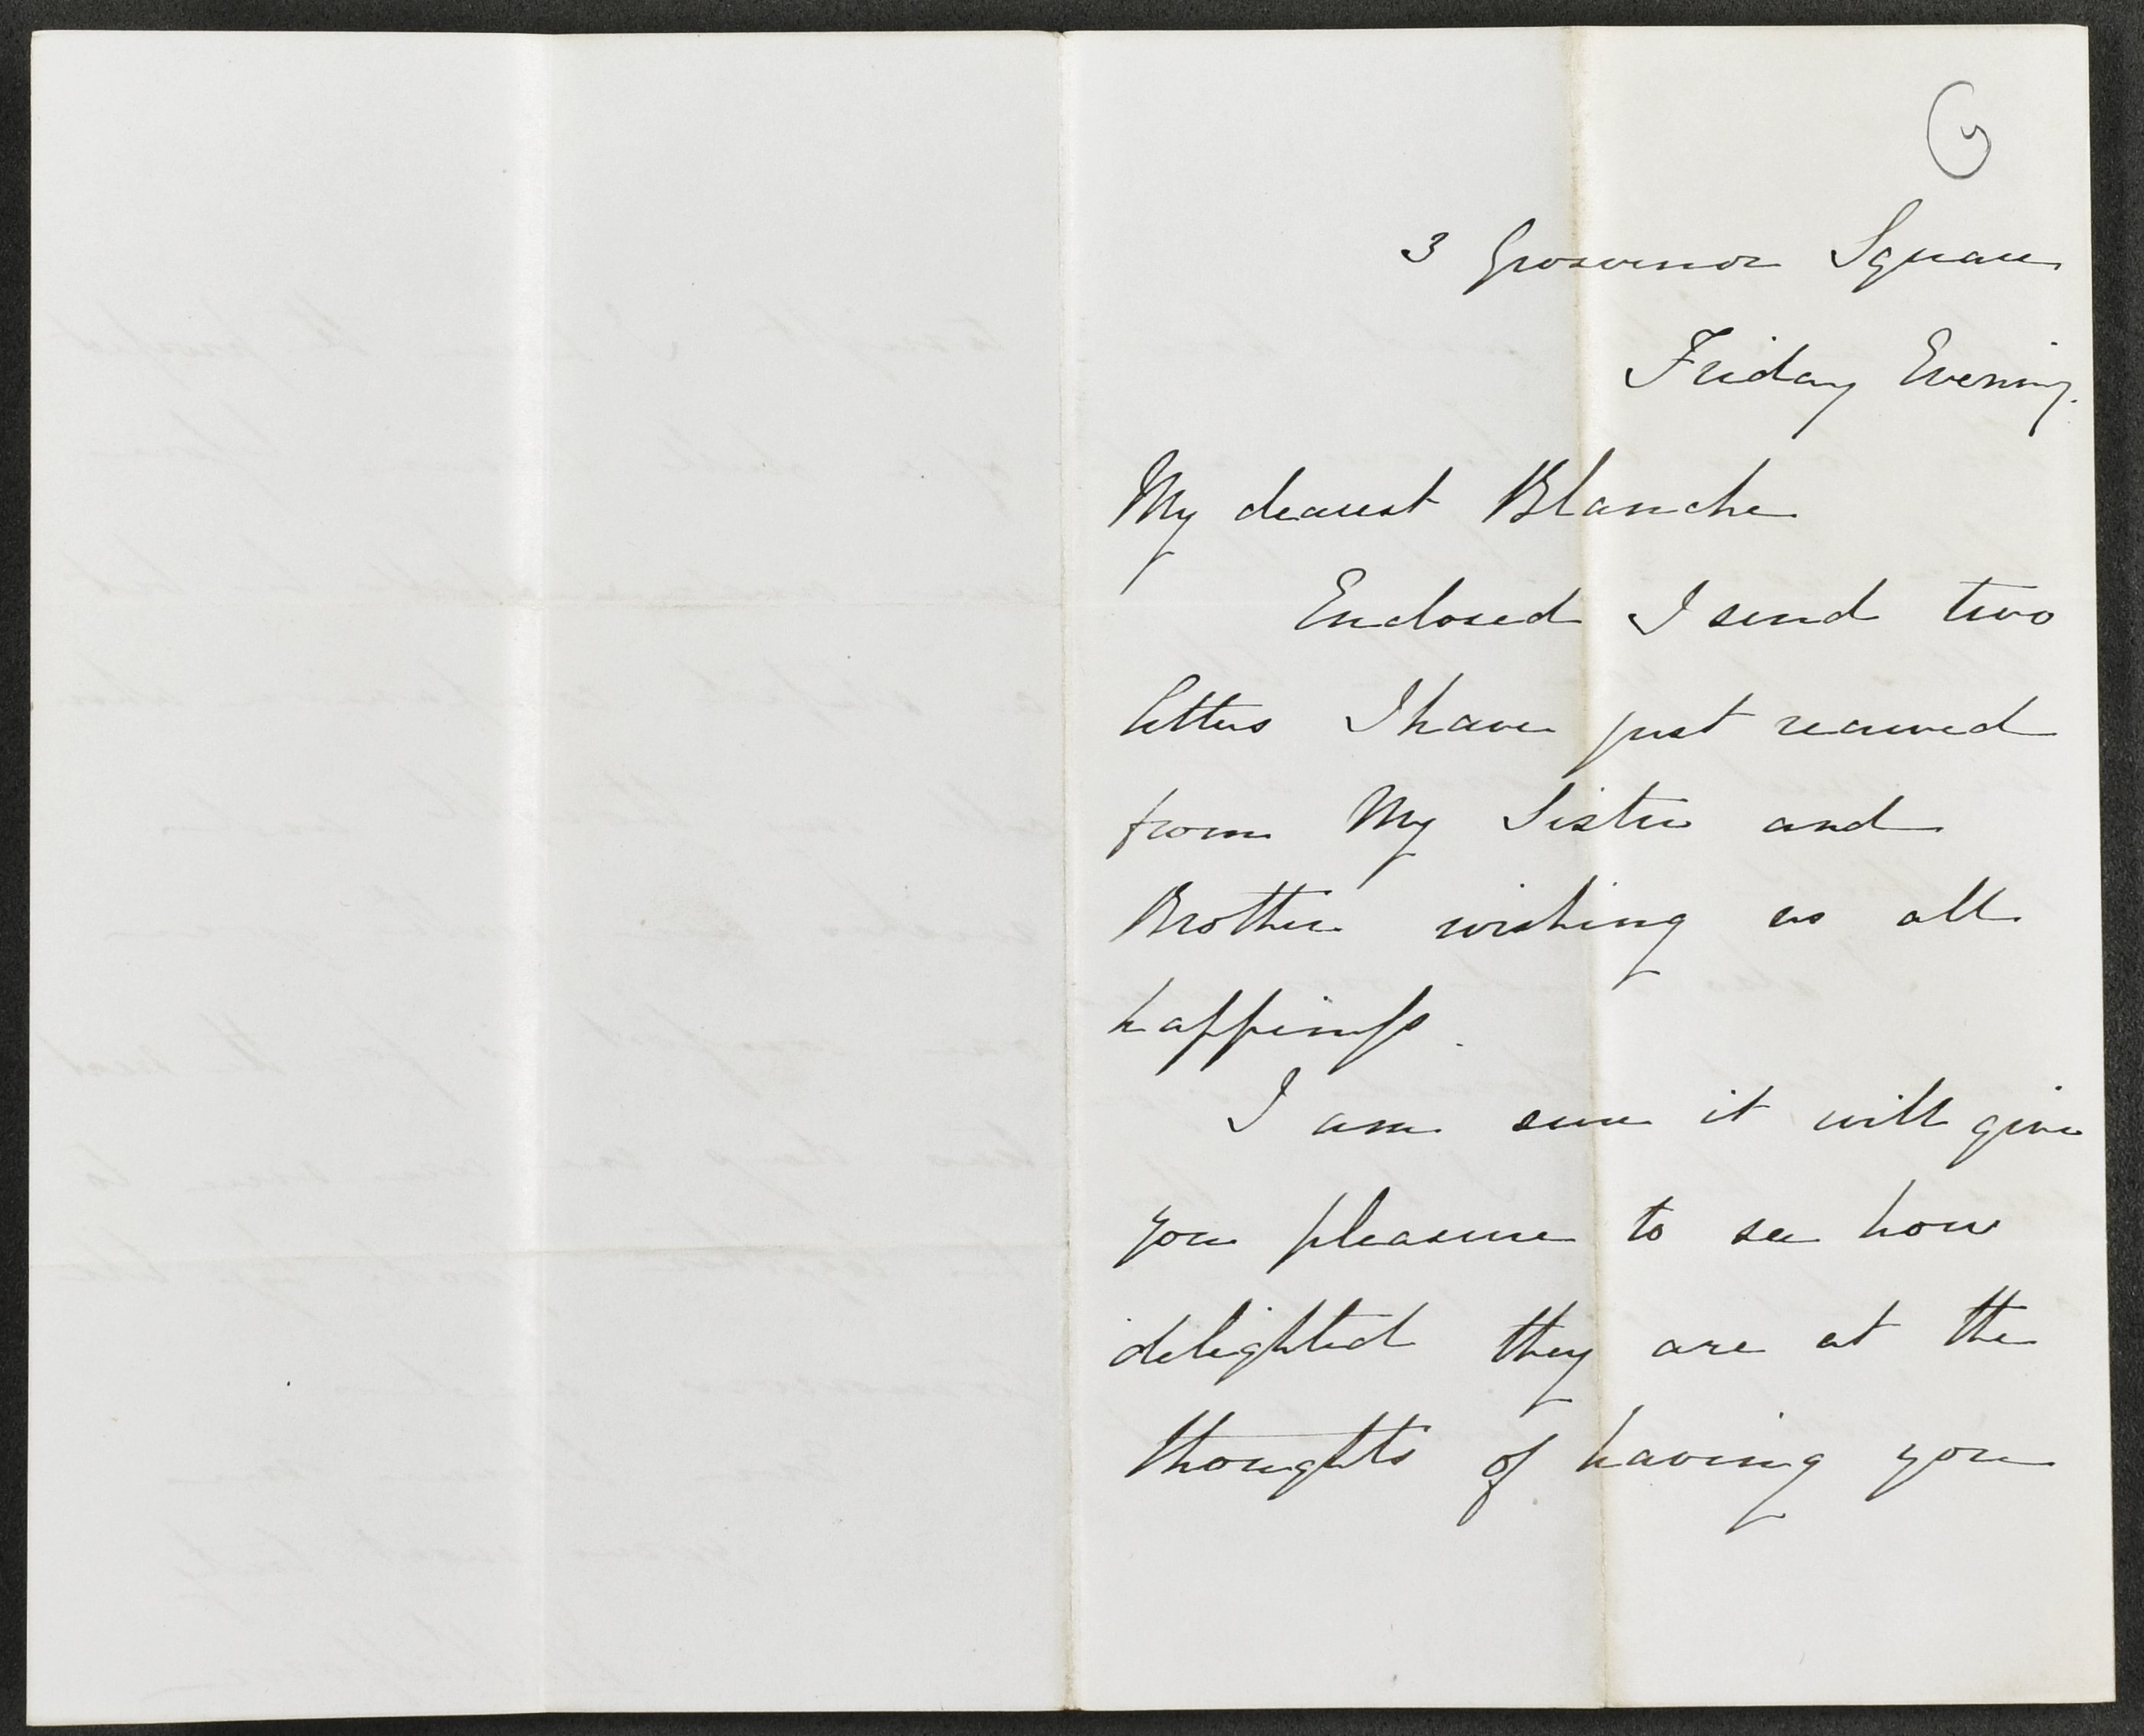 Letter from James Balfour to Lady Blanche following their engagement